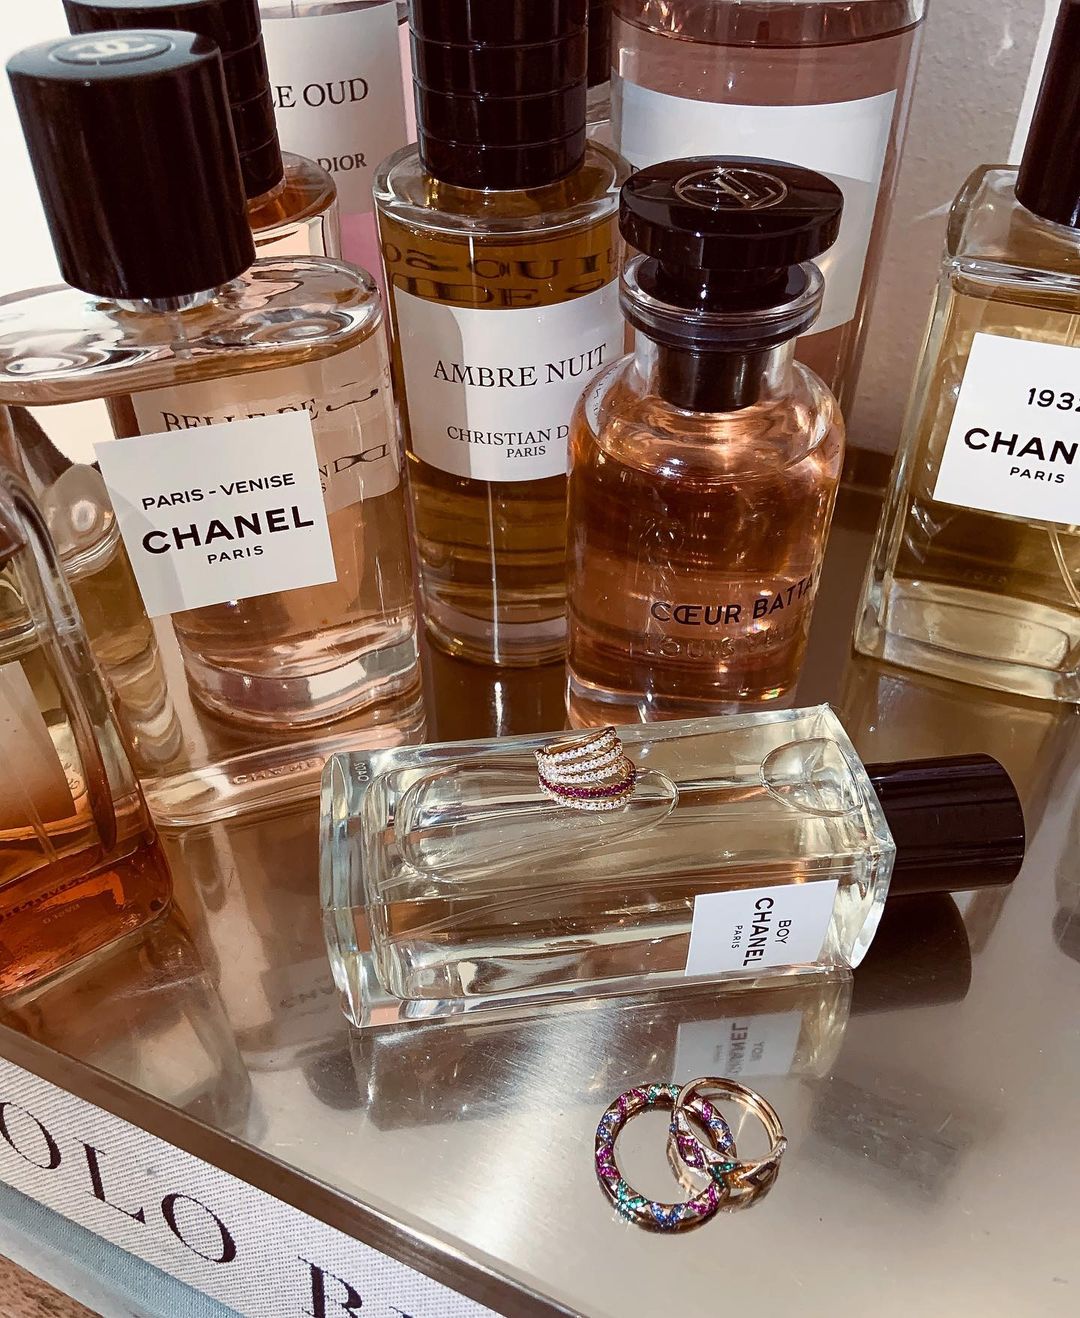 Beauty Insiders Are Tipping These The 16 Fragrances of 2022